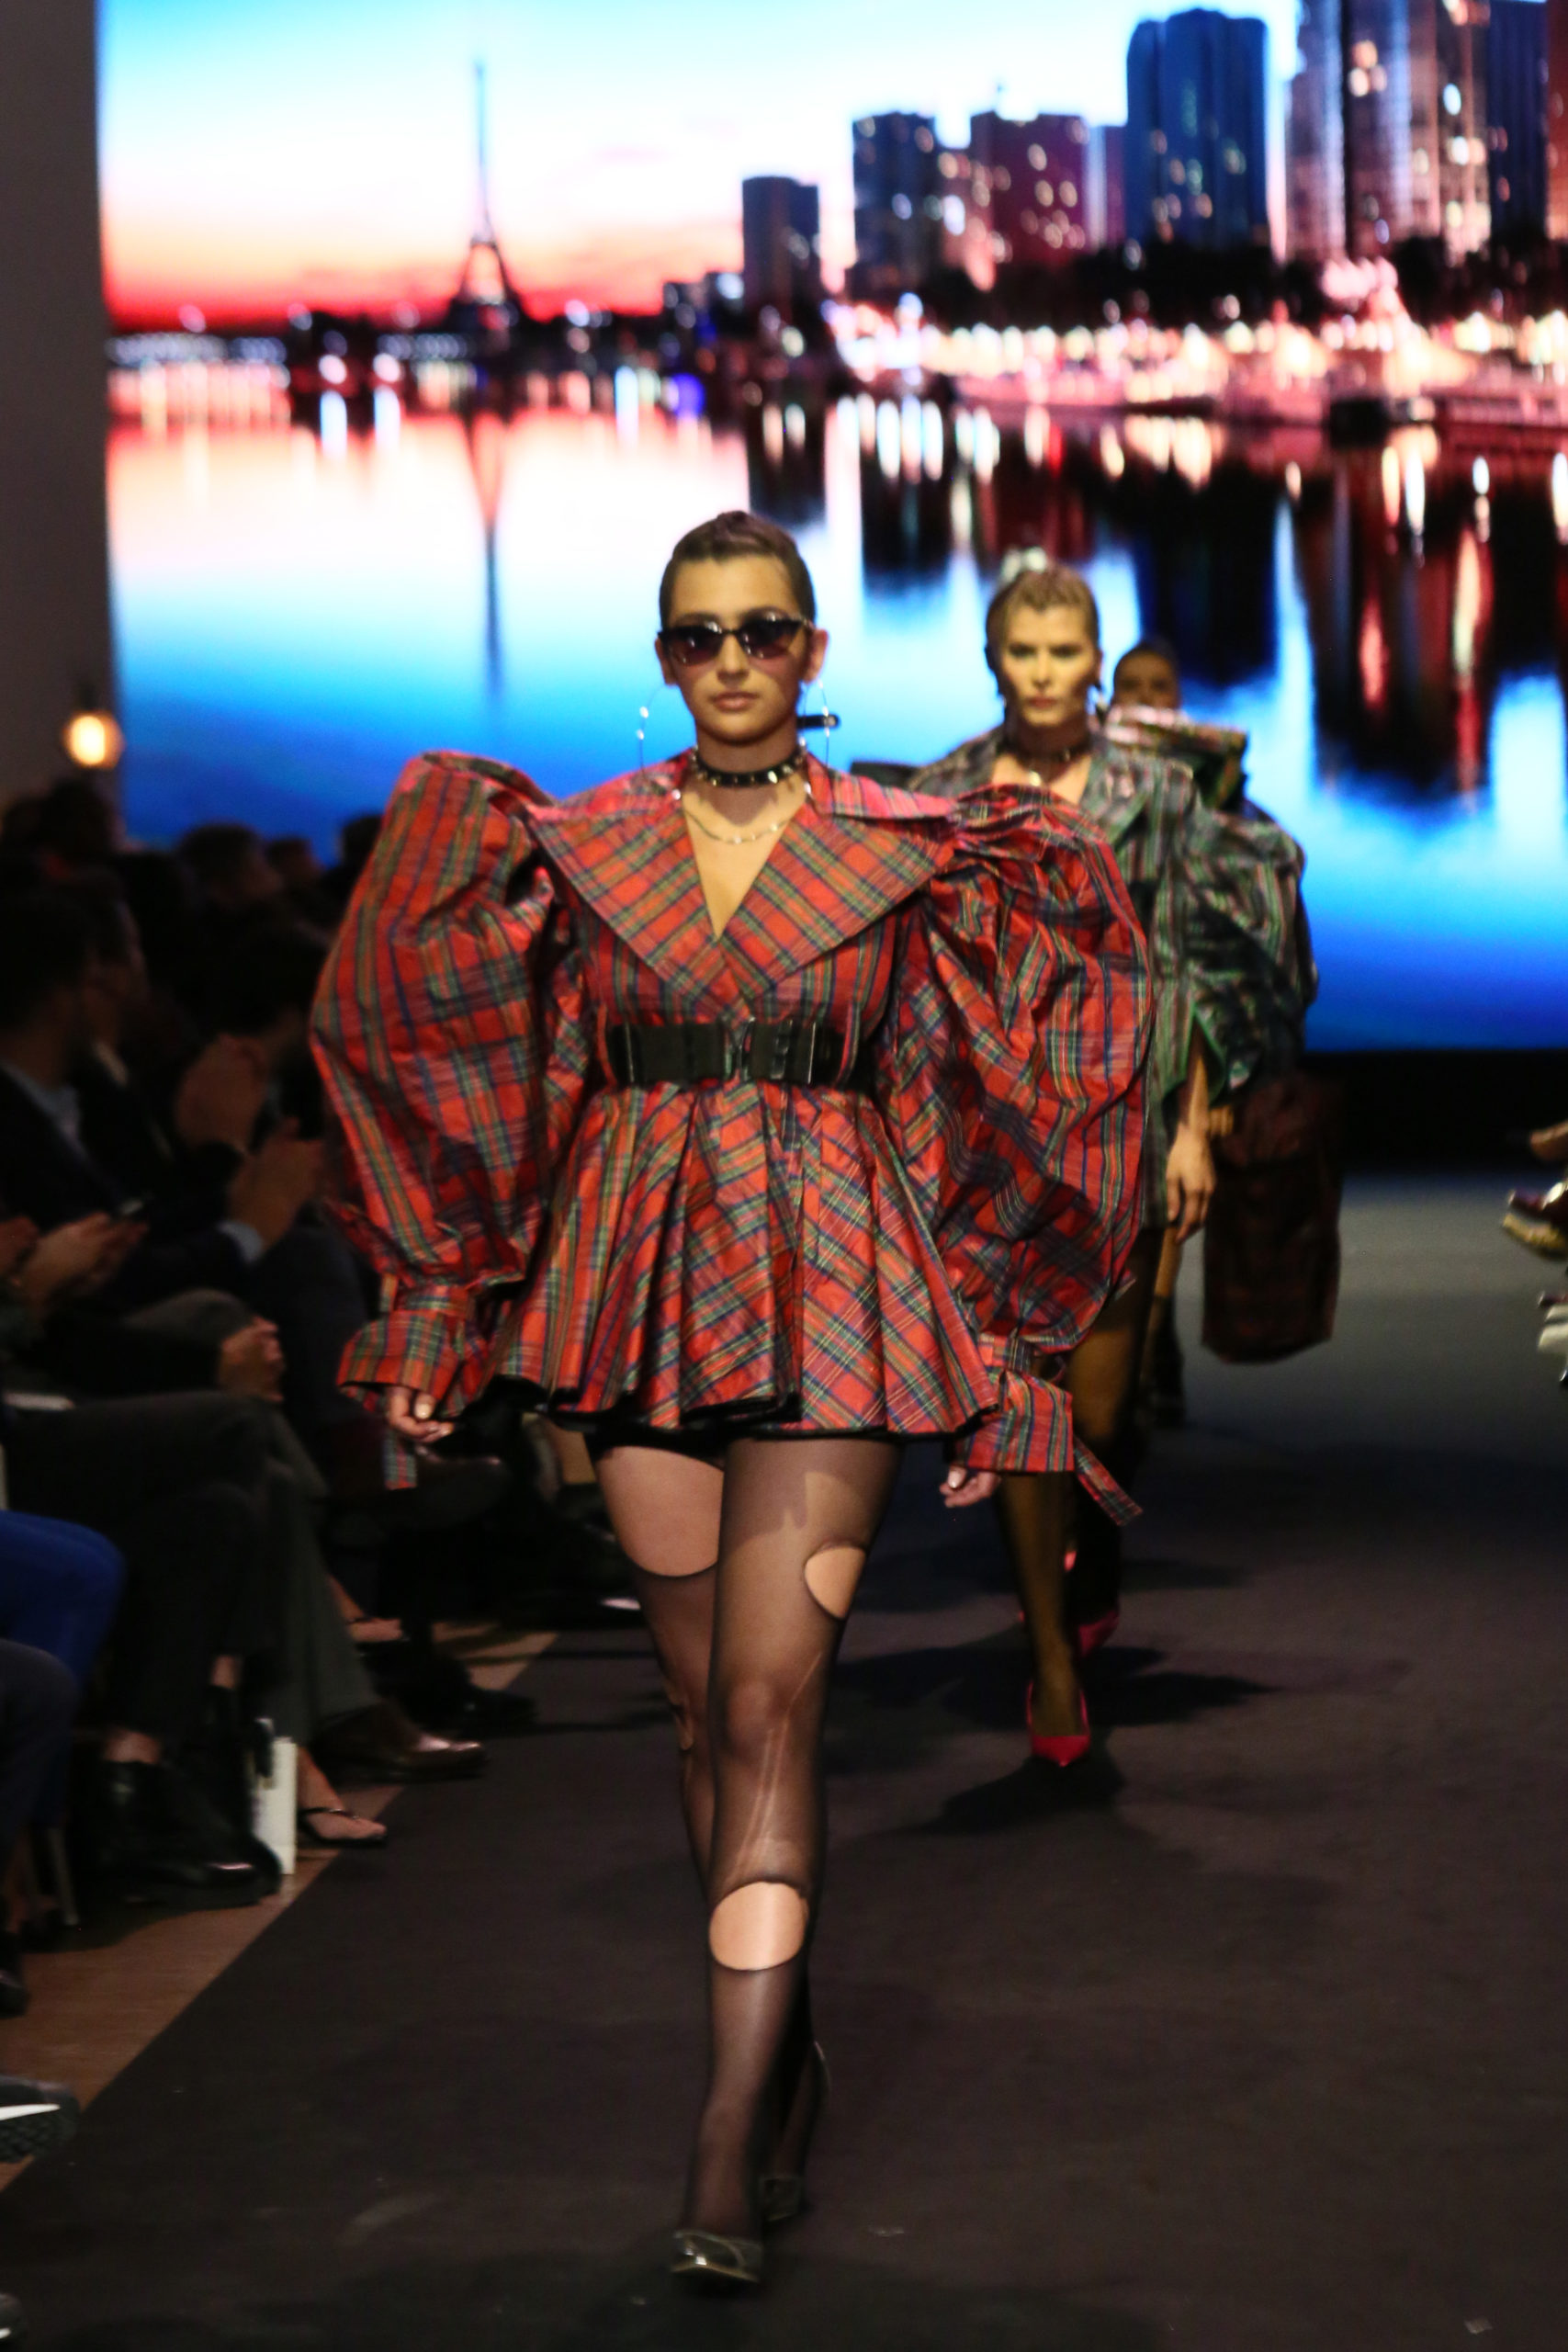 AFRICA-FASHION-UP-JEAN-CEDRIC-SOW-DN-AFRICA-DNA-INTERNATIONAL-MD0A0763